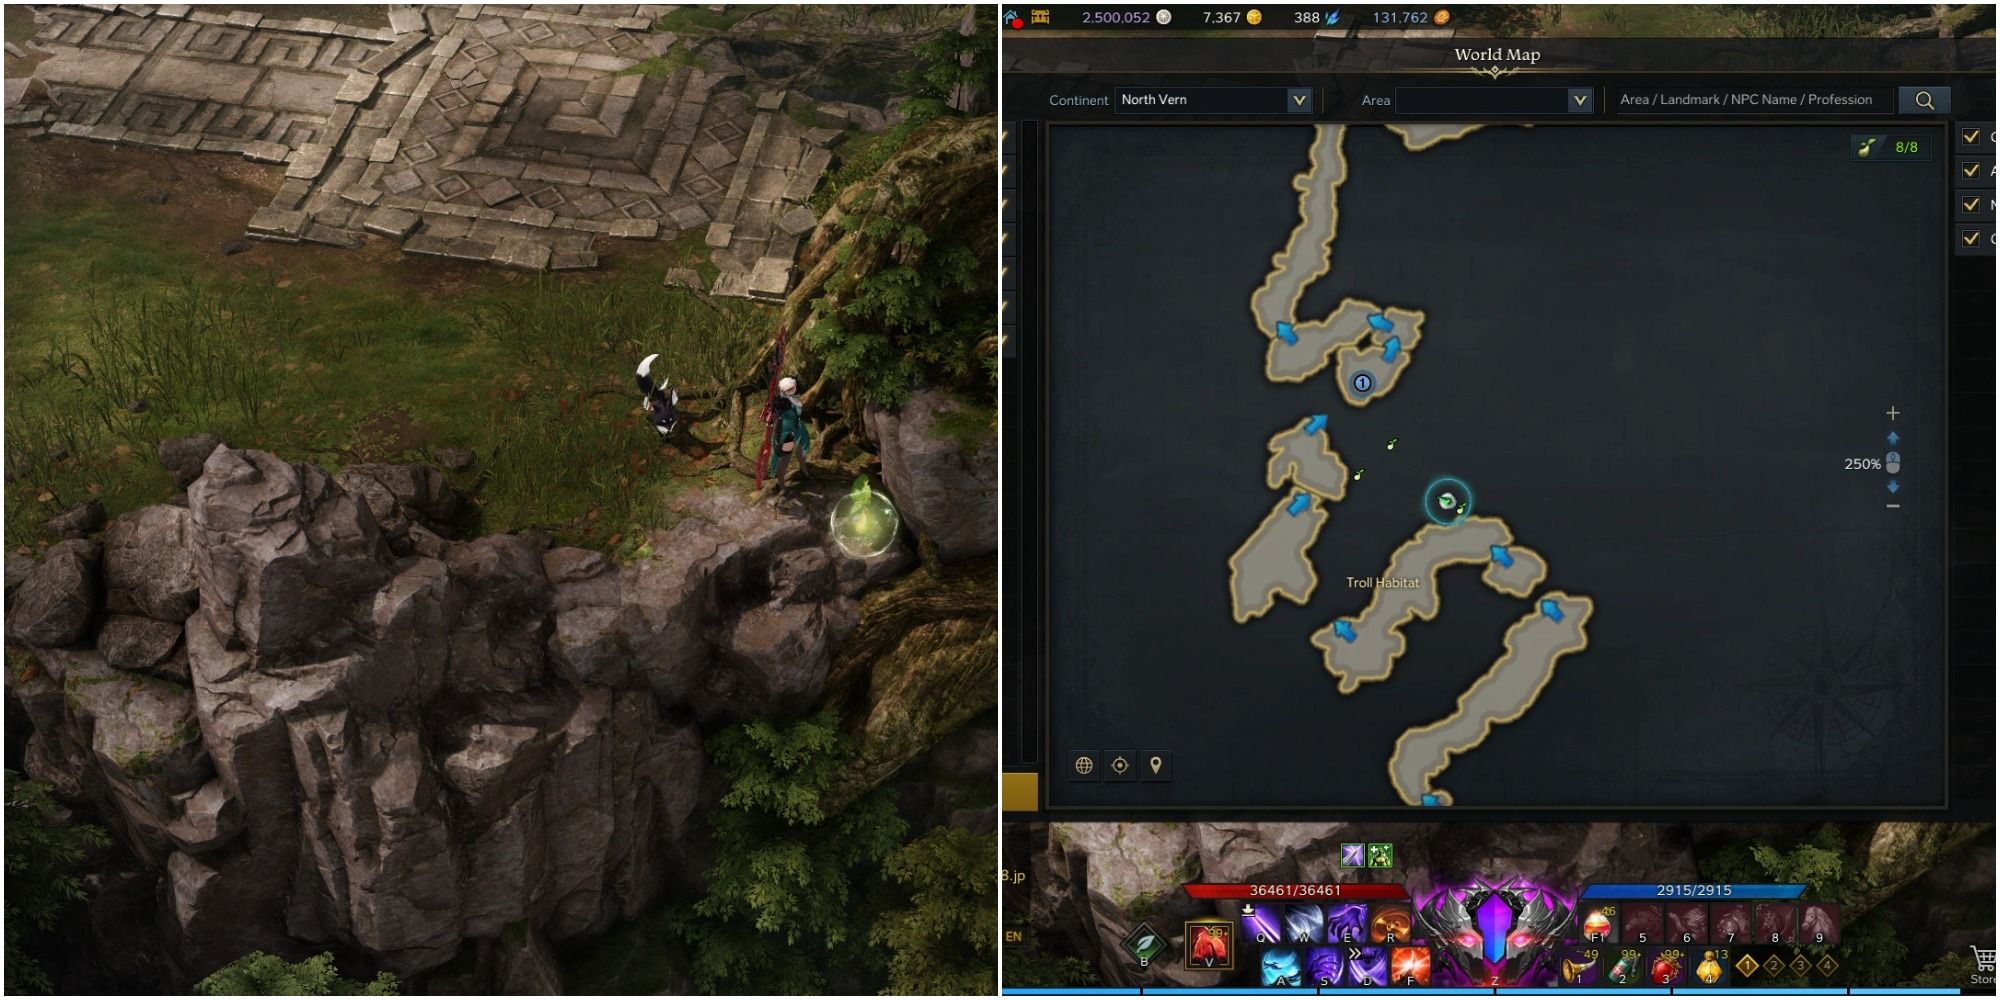 Lost Ark split image of Gorgon's Nest fourth Mokoko seed and its map location